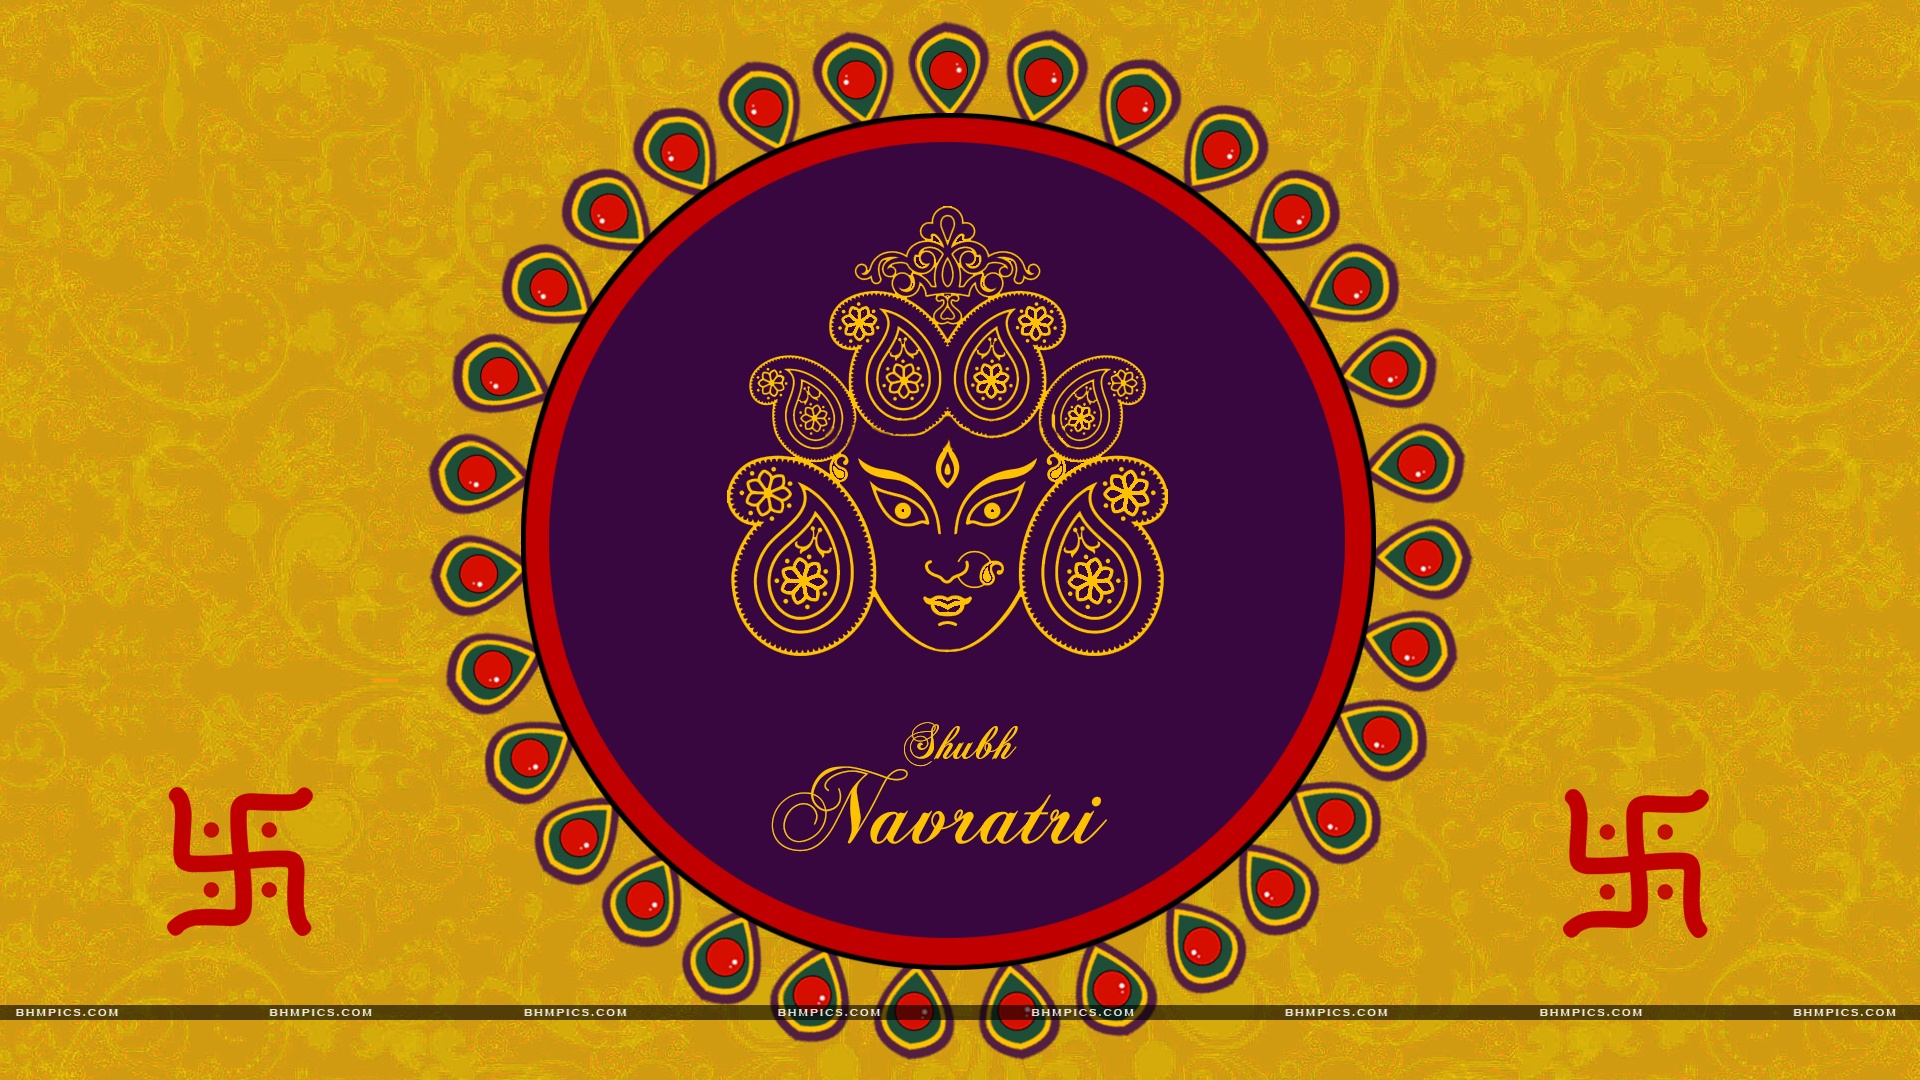 Shubh Navratri Wishes Wallpapers 1920x1080 791043